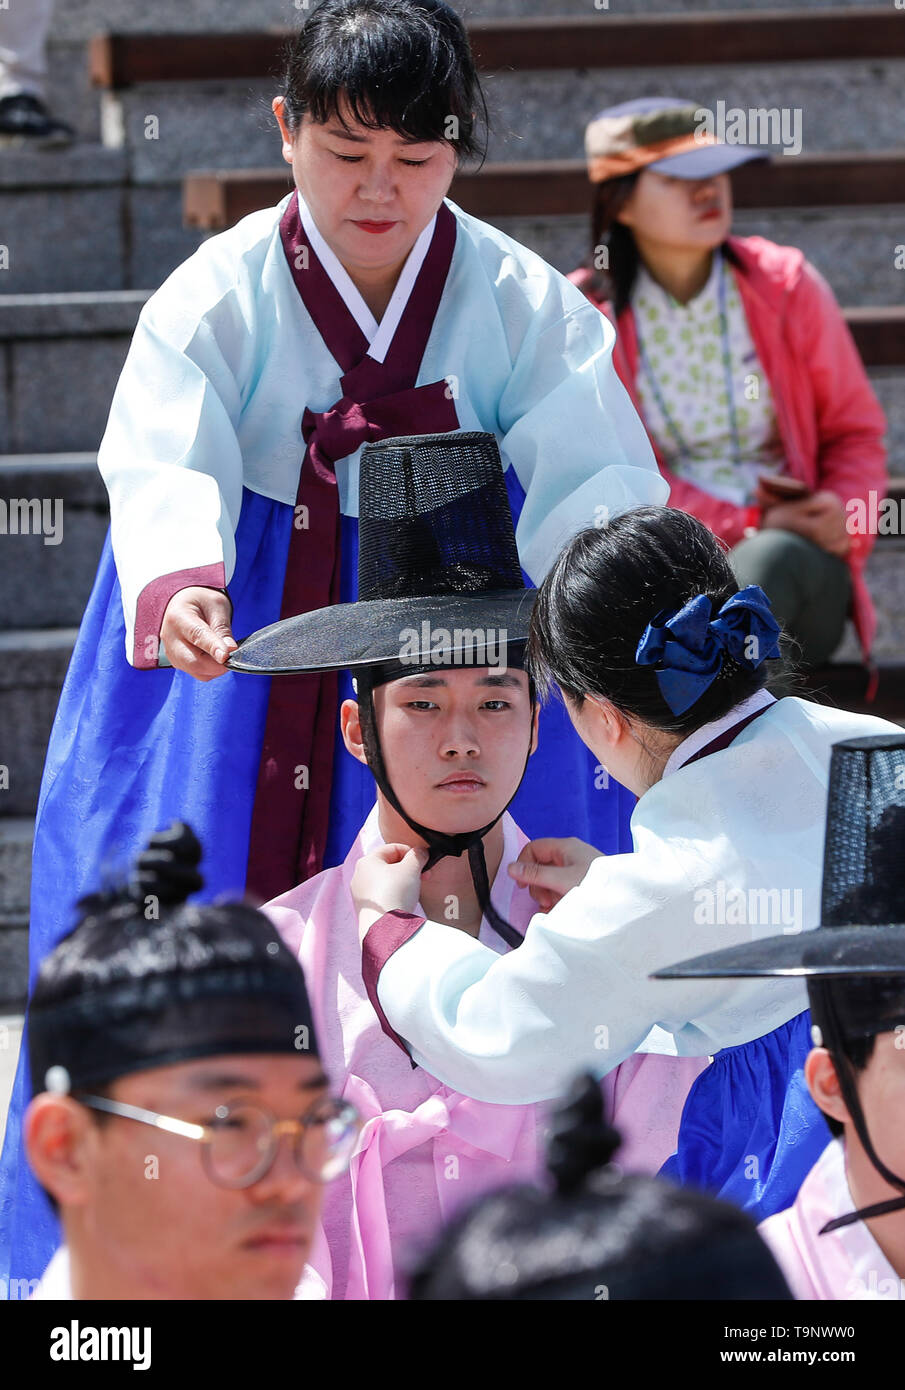 Seoul, South Korea. 20th May, 2019. A student wearing traditional Korean costume attends a coming-of-age ceremony in Seoul, capital of South Korea, May 20, 2019. Credit: Wang Jingqiang/Xinhua/Alamy Live News Stock Photo